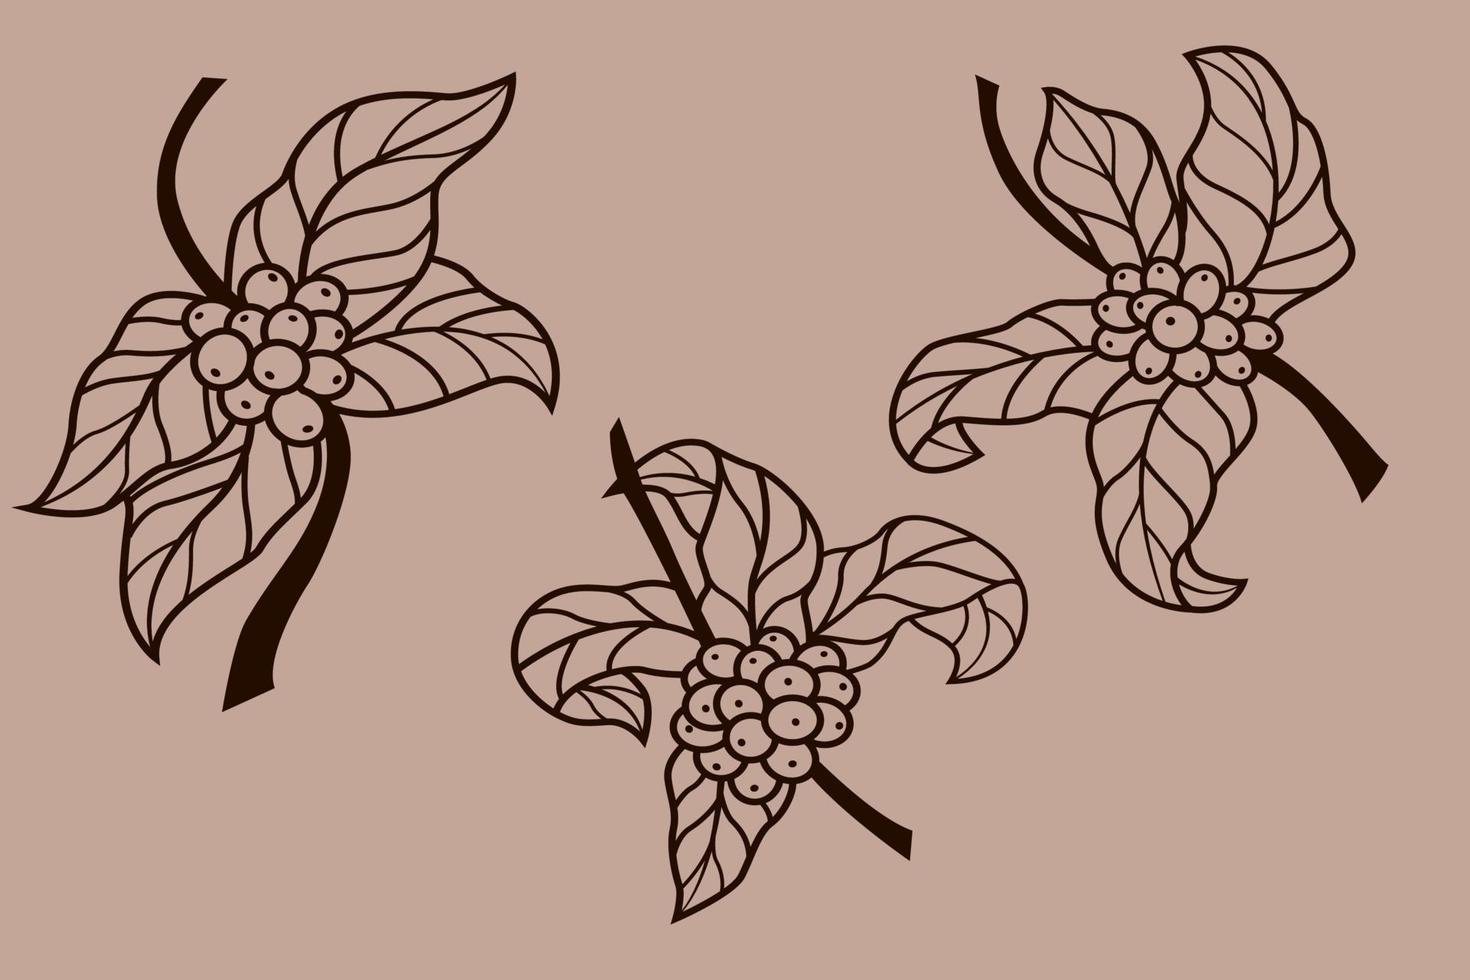 coffee tree vector elements you can change the color as you wish